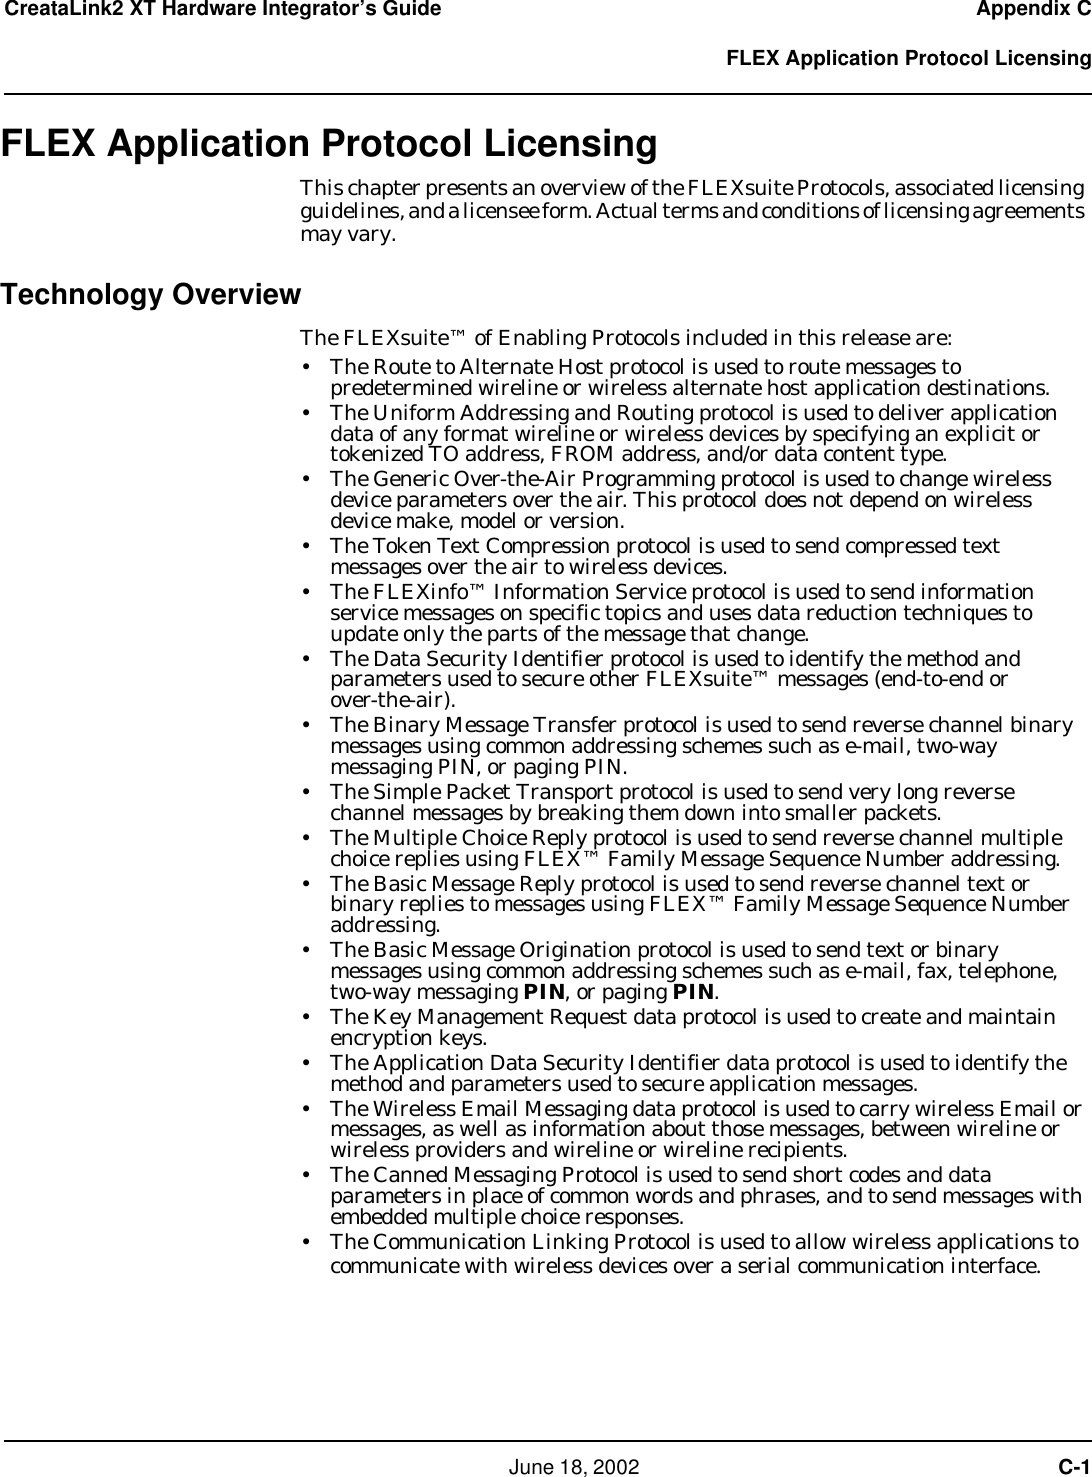     June 18, 2002  C-1CreataLink2 XT Hardware Integrator’s Guide Appendix C  FLEX Application Protocol LicensingFLEX Application Protocol LicensingThis chapter presents an overview of the FLEXsuite Protocols, associated licensing guidelines, and a licensee form. Actual terms and conditions of licensing agreements may vary.Technology OverviewThe FLEXsuite™ of Enabling Protocols included in this release are:• The Route to Alternate Host protocol is used to route messages to  predetermined wireline or wireless alternate host application destinations.• The Uniform Addressing and Routing protocol is used to deliver application data of any format wireline or wireless devices by specifying an explicit or tokenized TO address, FROM address, and/or data content type.• The Generic Over-the-Air Programming protocol is used to change wireless device parameters over the air. This protocol does not depend on wireless device make, model or version.• The Token Text Compression protocol is used to send compressed text messages over the air to wireless devices.• The FLEXinfo™ Information Service protocol is used to send information service messages on specific topics and uses data reduction techniques to update only the parts of the message that change.• The Data Security Identifier protocol is used to identify the method and parameters used to secure other FLEXsuite™ messages (end-to-end or  over-the-air).• The Binary Message Transfer protocol is used to send reverse channel binary messages using common addressing schemes such as e-mail, two-way messaging PIN, or paging PIN.• The Simple Packet Transport protocol is used to send very long reverse channel messages by breaking them down into smaller packets.• The Multiple Choice Reply protocol is used to send reverse channel multiple choice replies using FLEX™ Family Message Sequence Number addressing.• The Basic Message Reply protocol is used to send reverse channel text or binary replies to messages using FLEX™ Family Message Sequence Number addressing.• The Basic Message Origination protocol is used to send text or binary messages using common addressing schemes such as e-mail, fax, telephone, two-way messaging PIN, or paging PIN.• The Key Management Request data protocol is used to create and maintain encryption keys.• The Application Data Security Identifier data protocol is used to identify the method and parameters used to secure application messages.• The Wireless Email Messaging data protocol is used to carry wireless Email or messages, as well as information about those messages, between wireline or wireless providers and wireline or wireline recipients.• The Canned Messaging Protocol is used to send short codes and data parameters in place of common words and phrases, and to send messages with embedded multiple choice responses.• The Communication Linking Protocol is used to allow wireless applications to communicate with wireless devices over a serial communication interface.CAppendix C